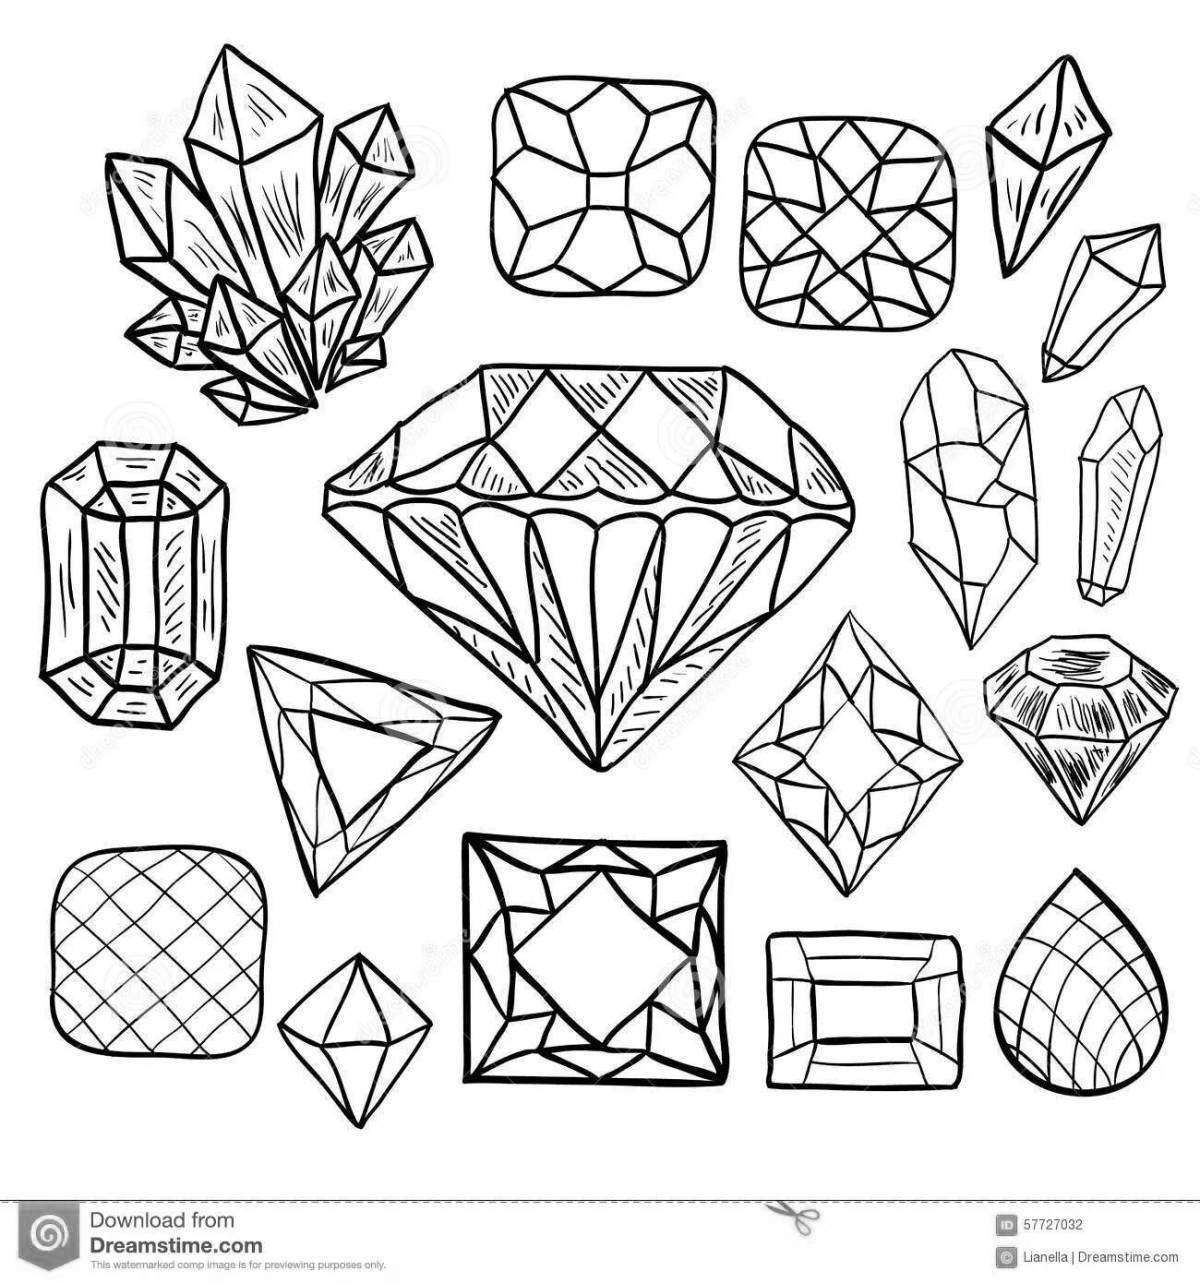 Flawless Crystals for Coloring Page